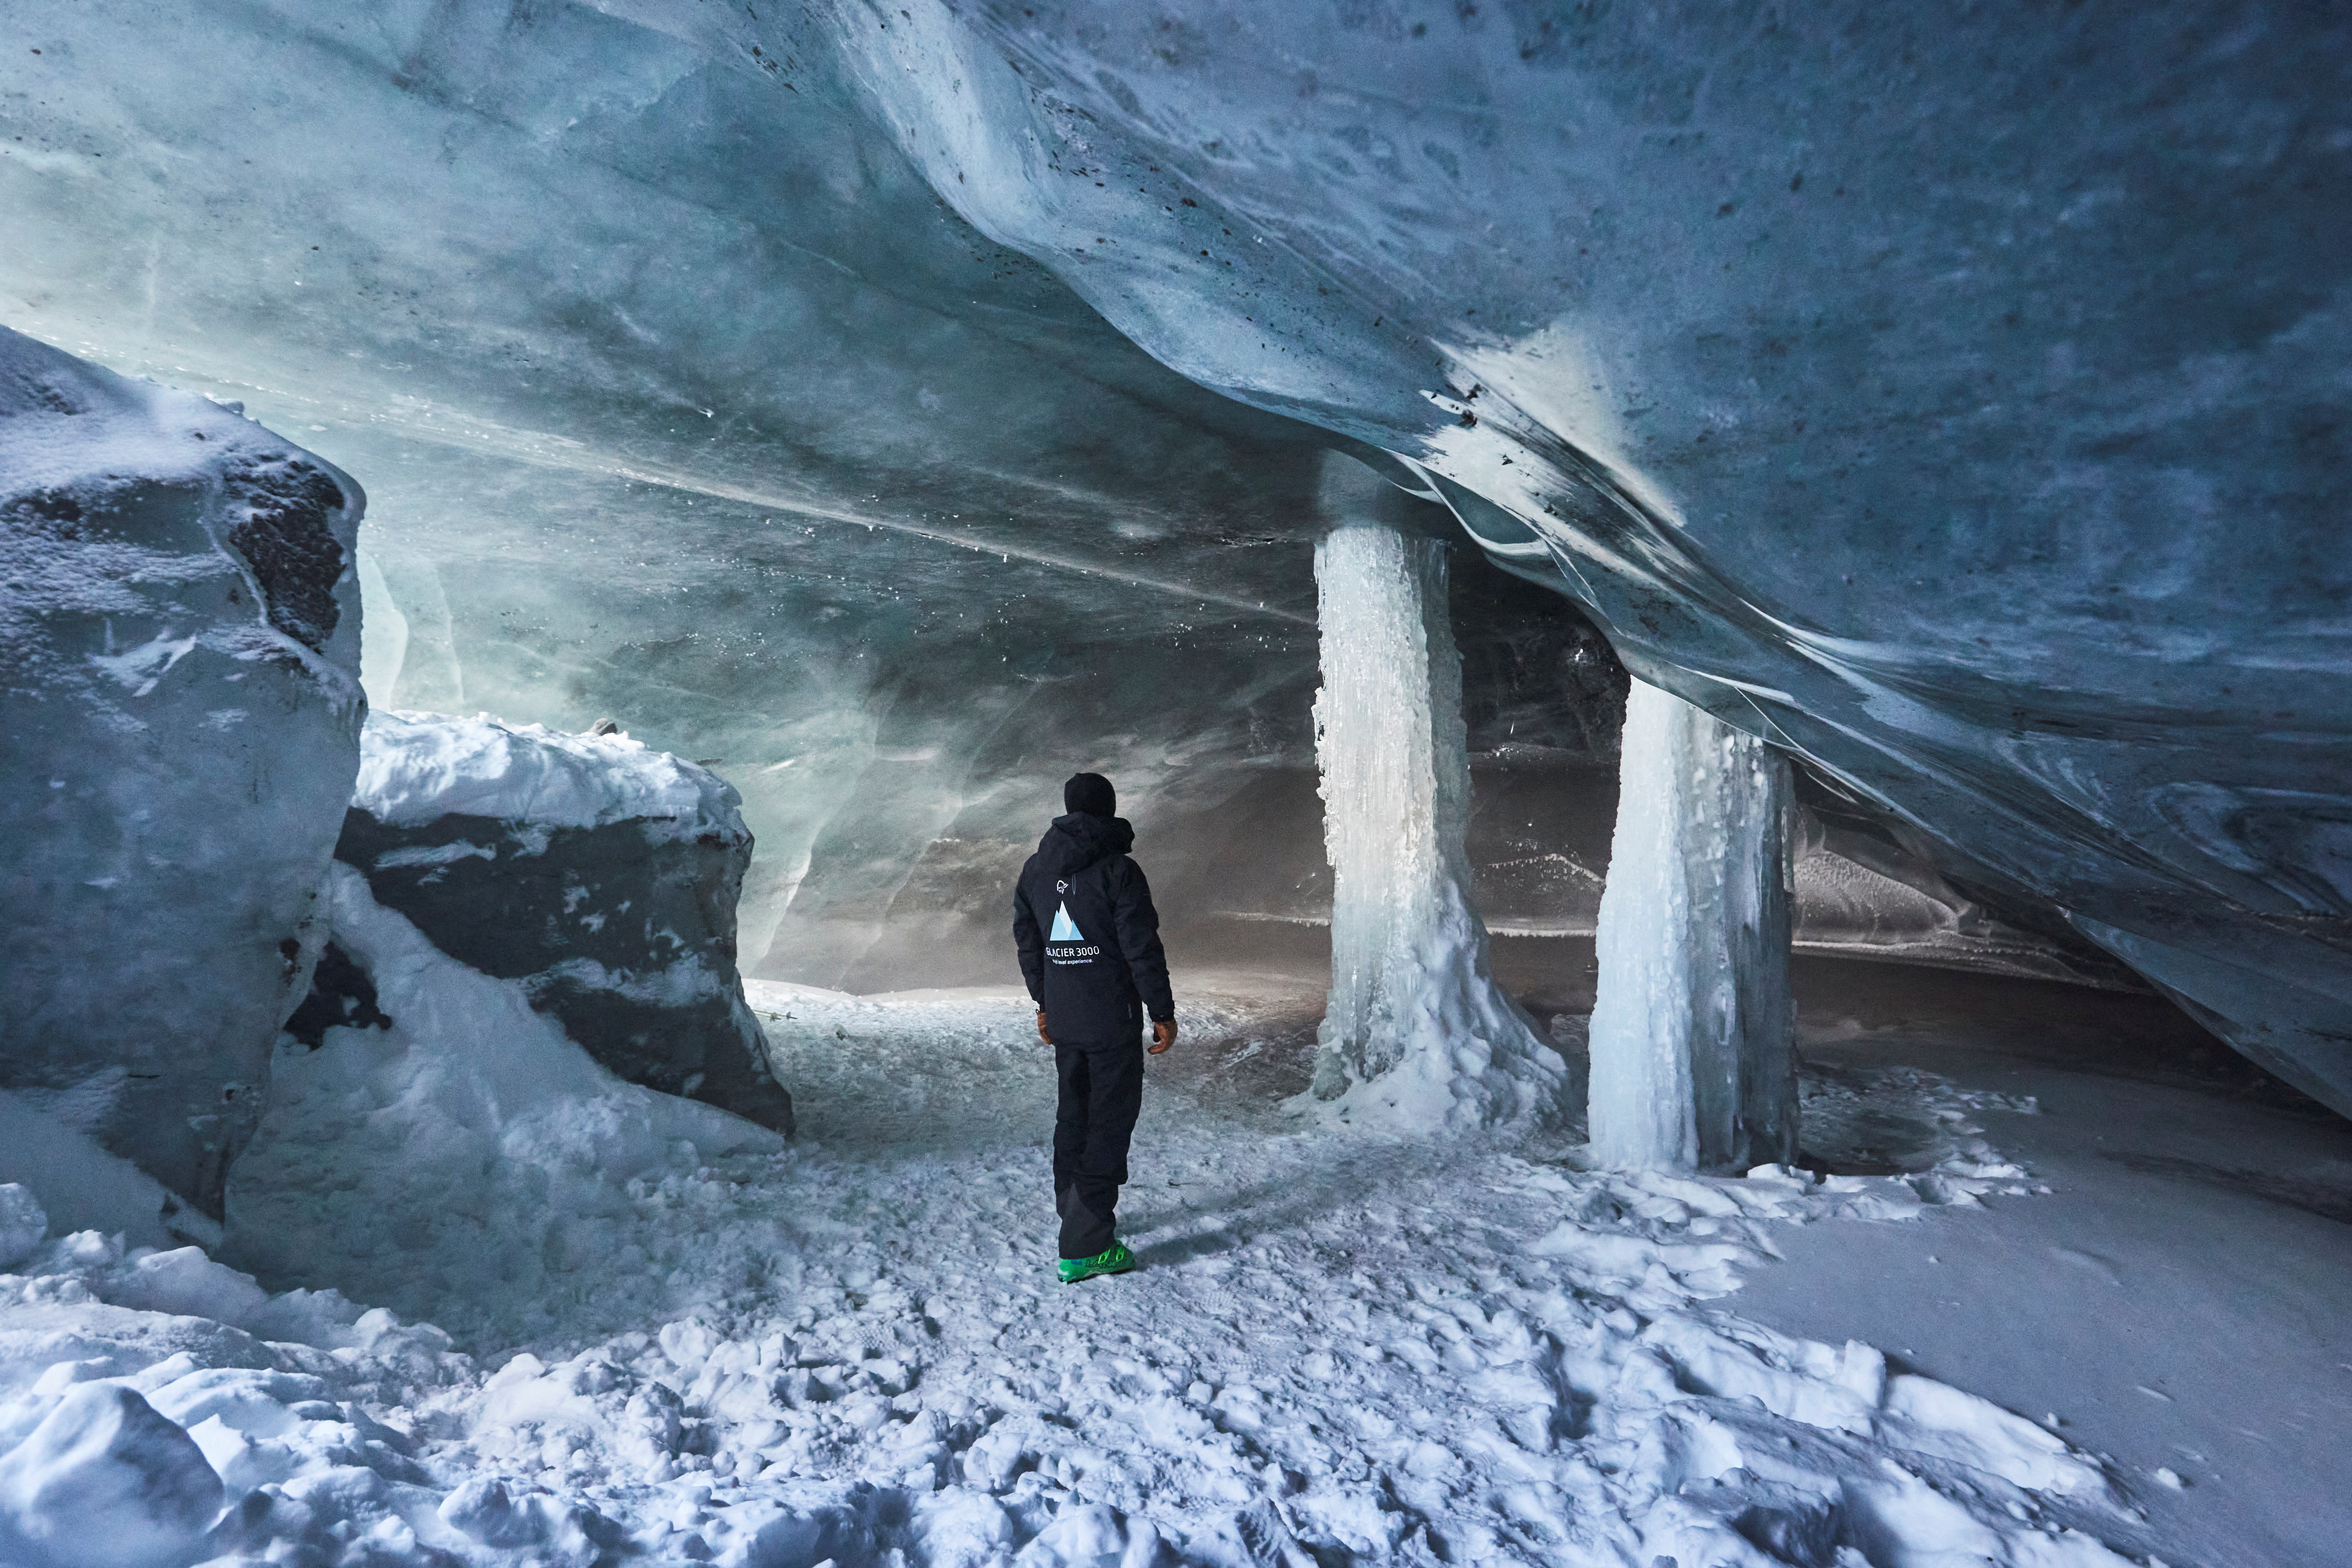 Bernhard Tschannen stands in the ice cave at the Glacier 3000 ski resort in Les Diablerets